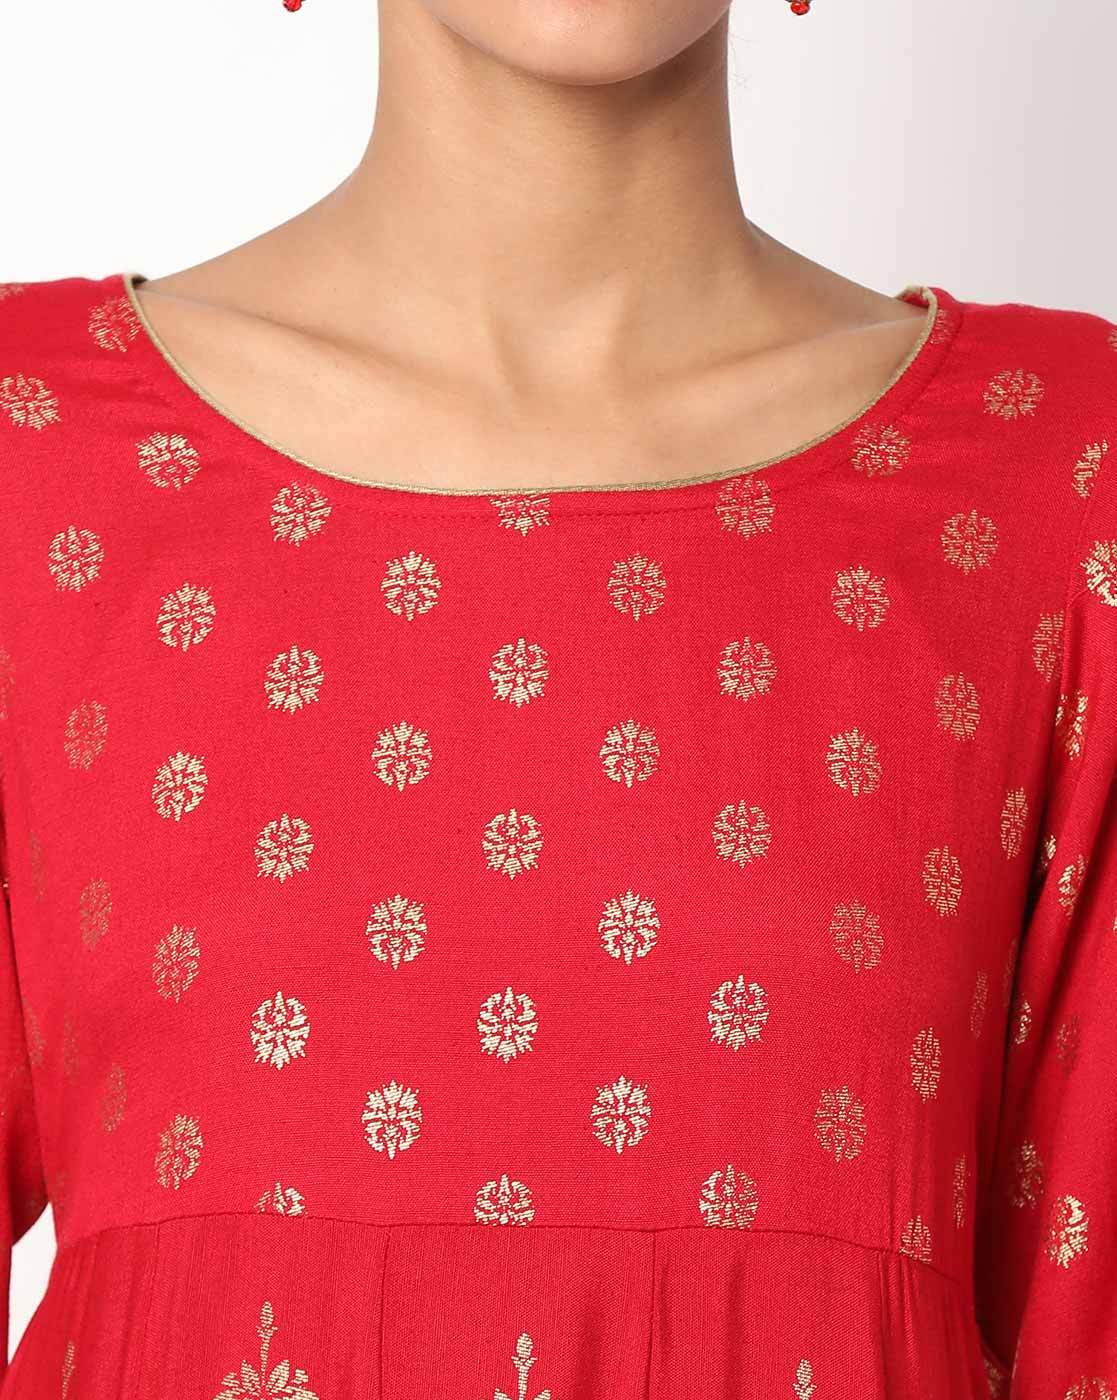 Chickpet Bangalore wholesale Avaasa Branded Kurtis||290/- only|| single  piece available - YouTube